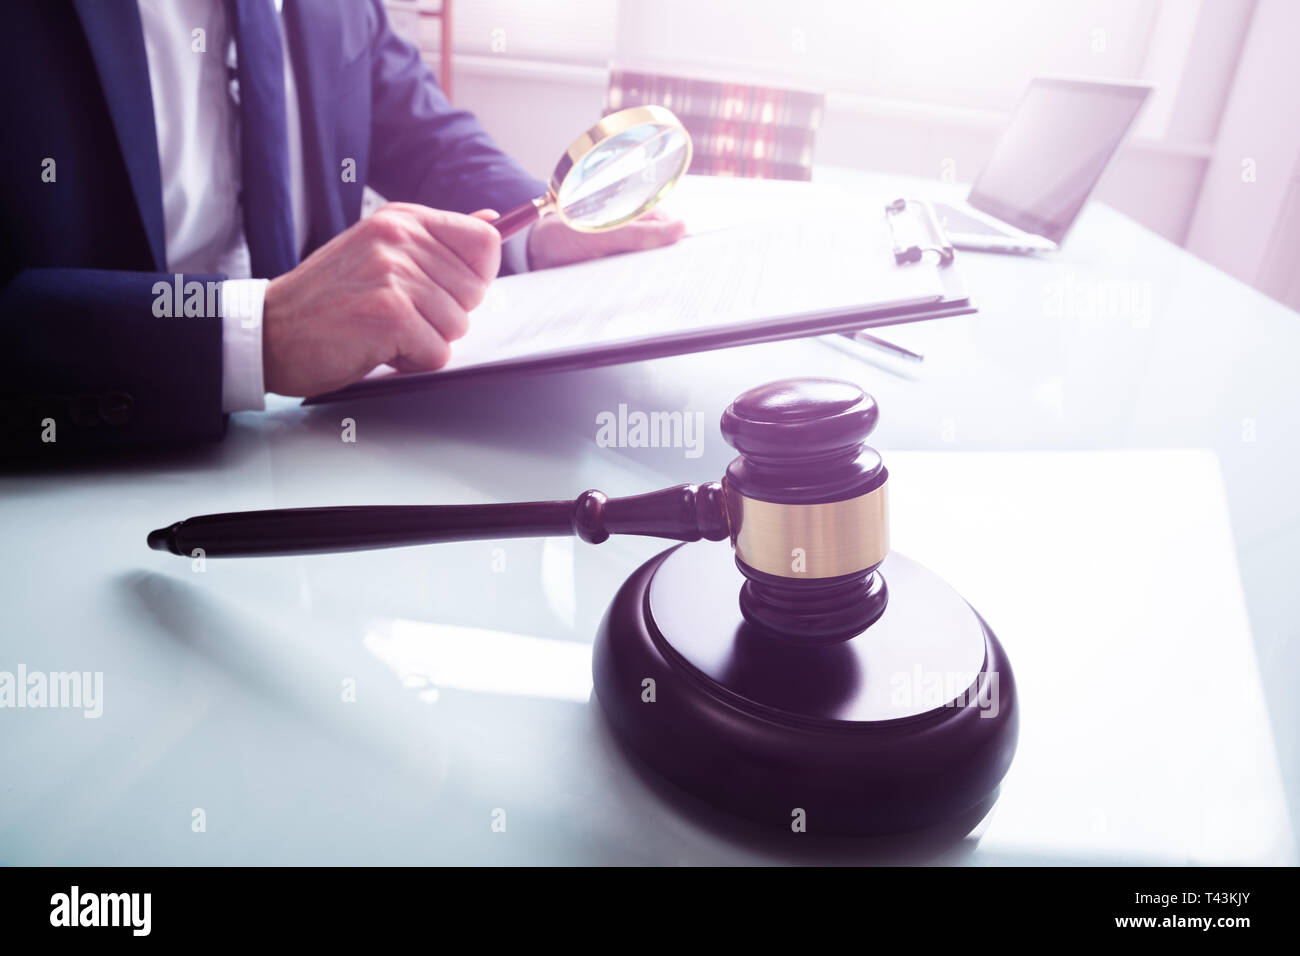 Male Justice Working On Legal Documents With Gavel In The Courtroom Stock Photo